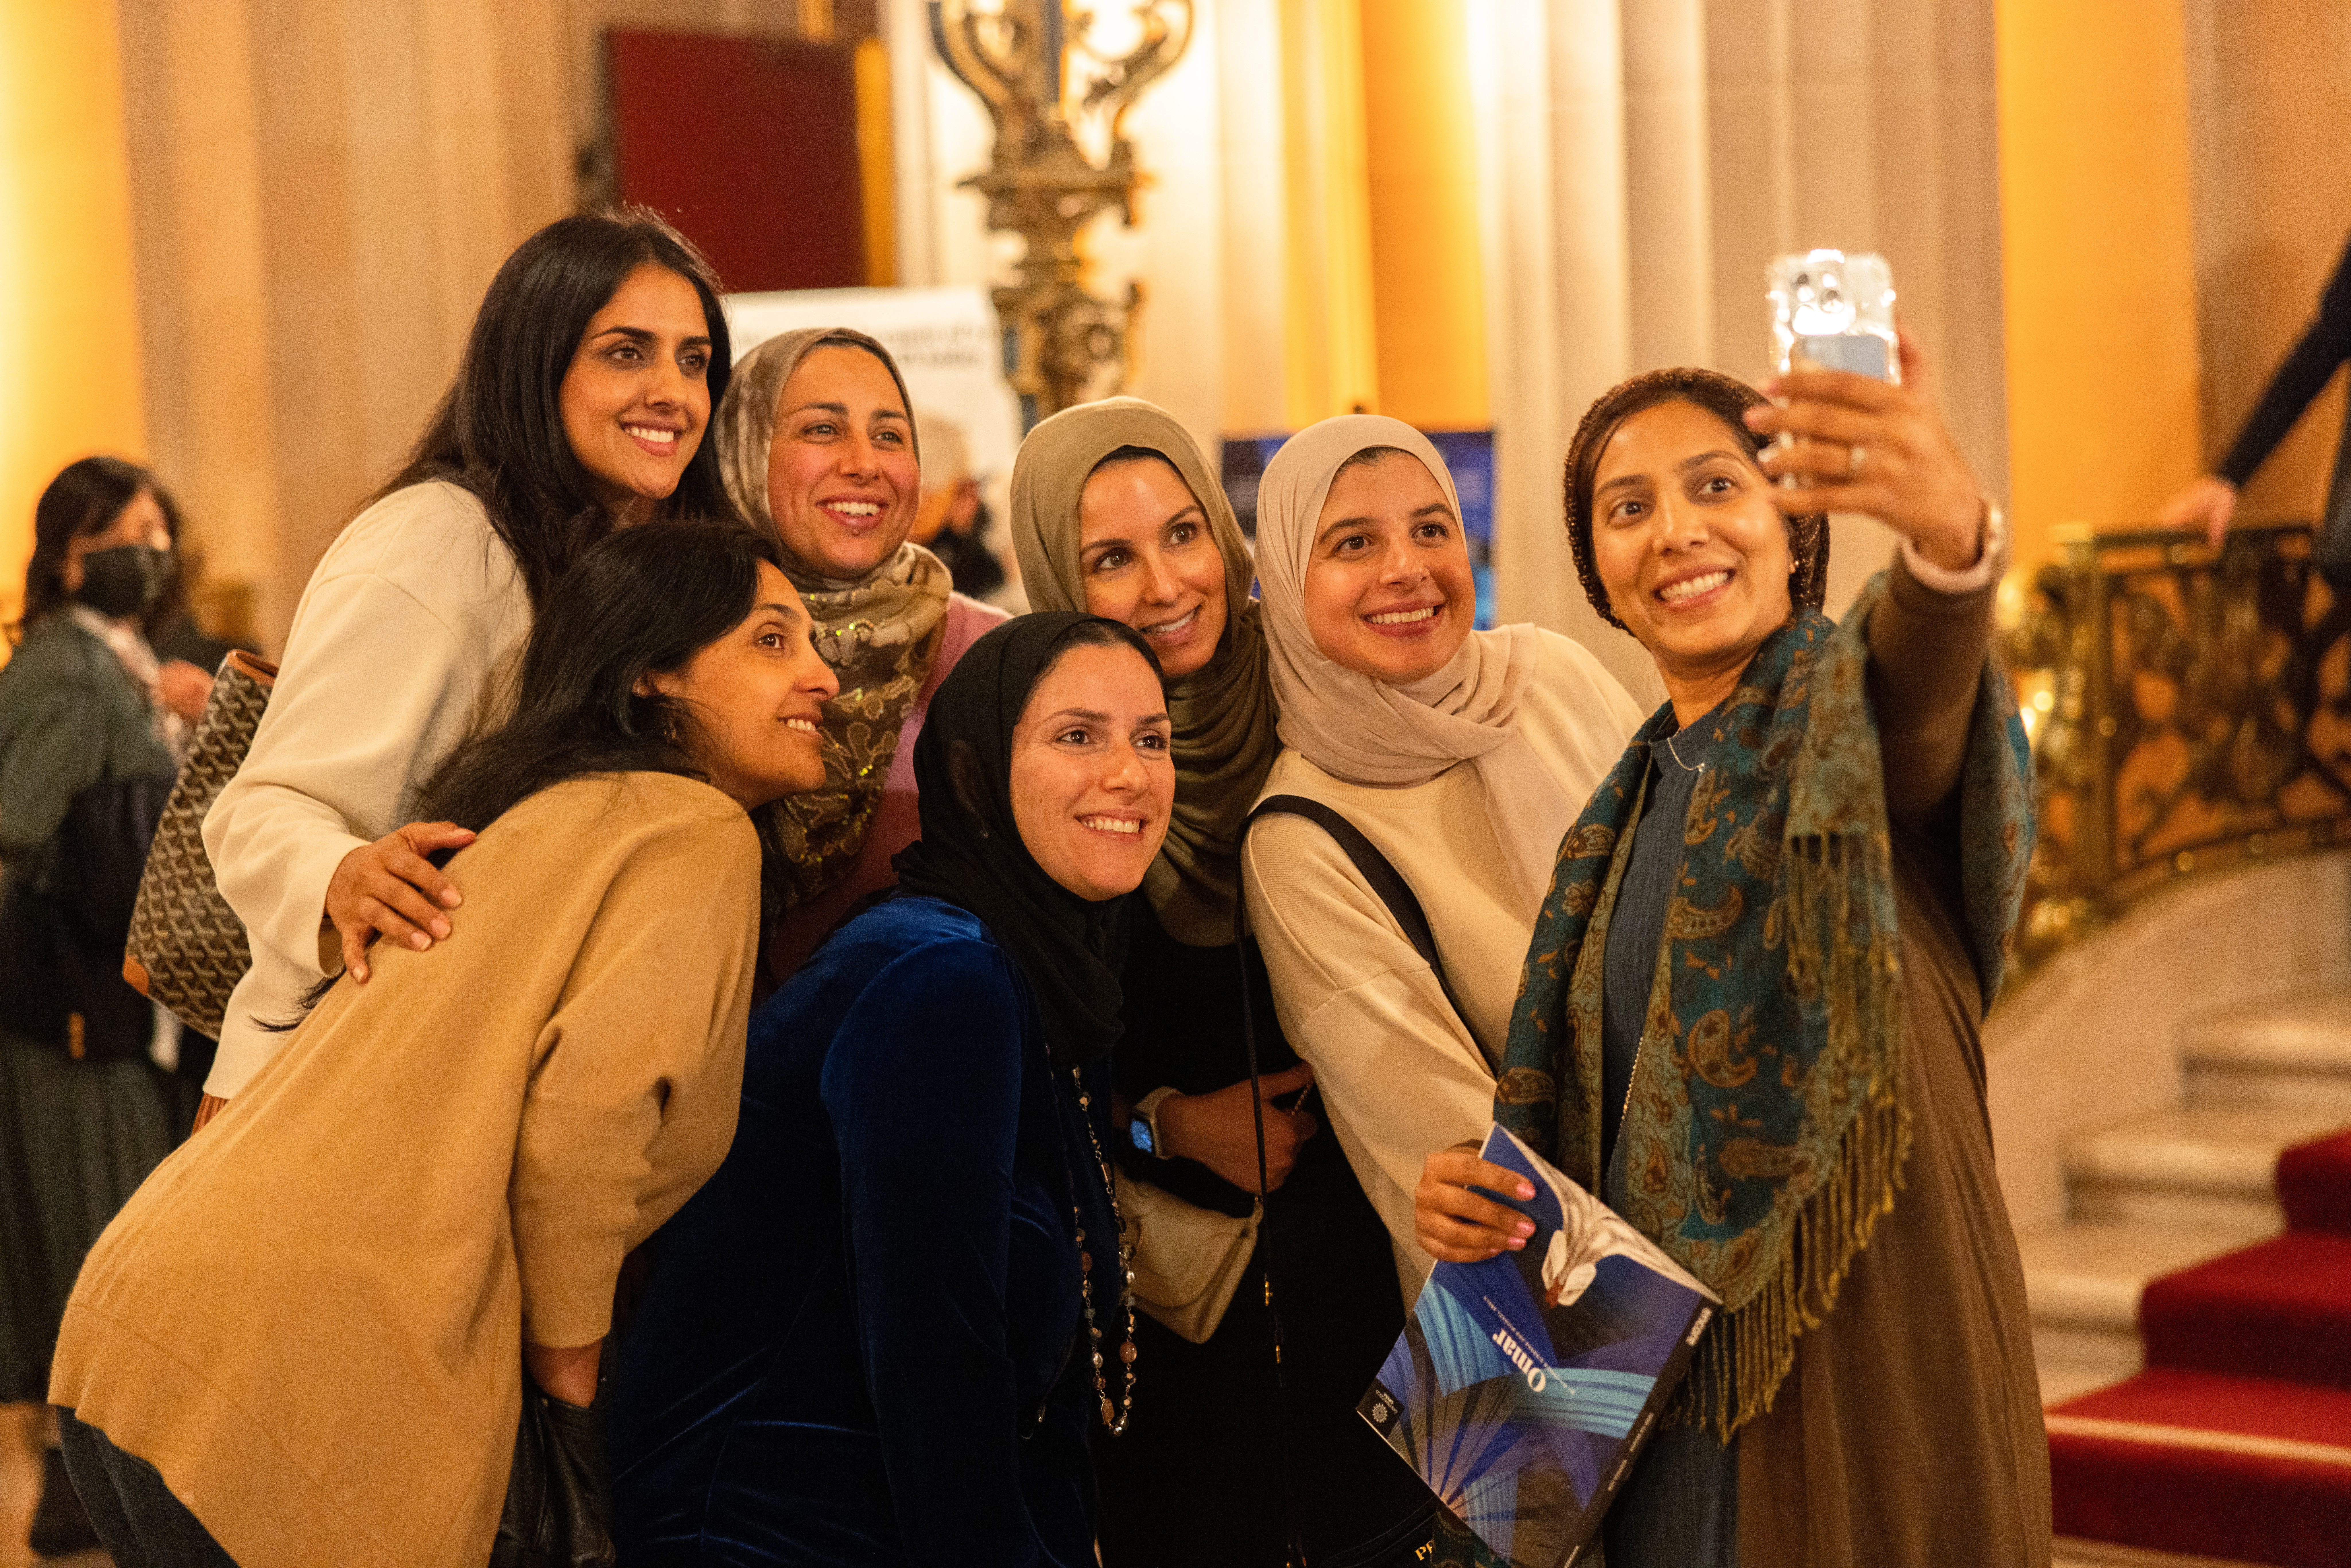 Women gathered and smiling for a selfie